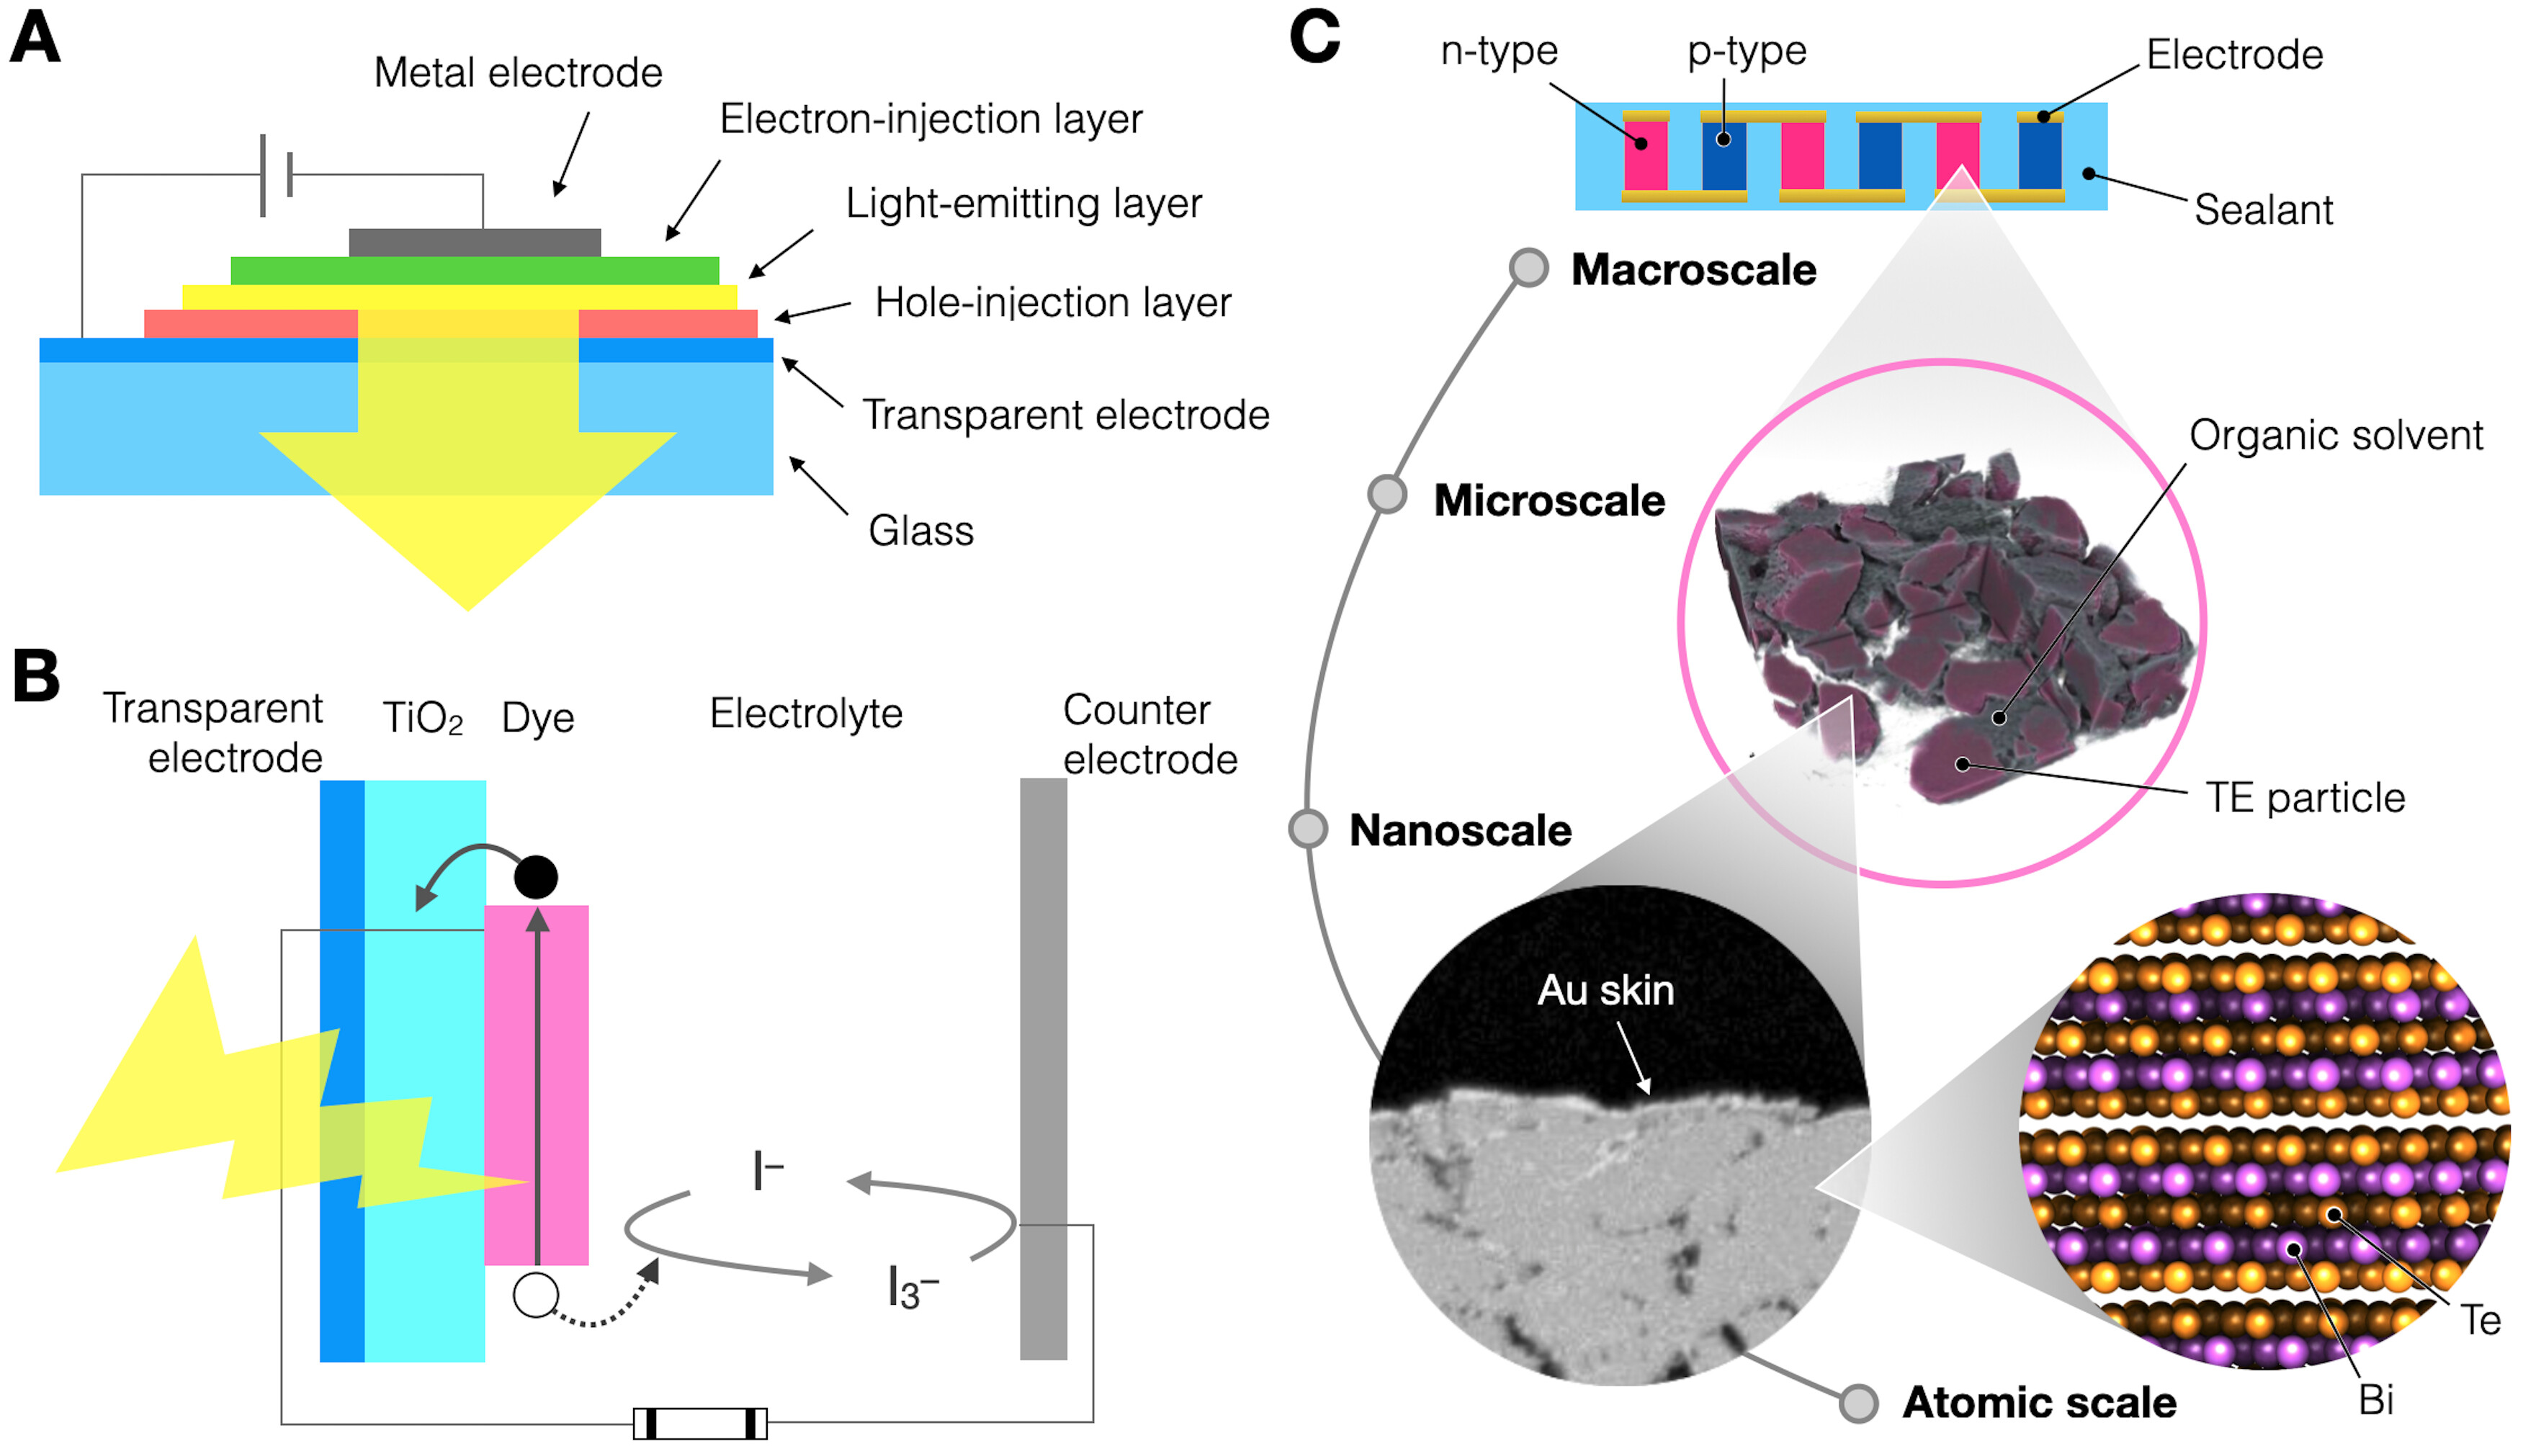 A hierarchical design for thermoelectric hybrid materials: Bi<sub>2</sub>Te<sub>3</sub> particles covered by partial Au skins enhance thermoelectric performance in sticky thermoelectric materials